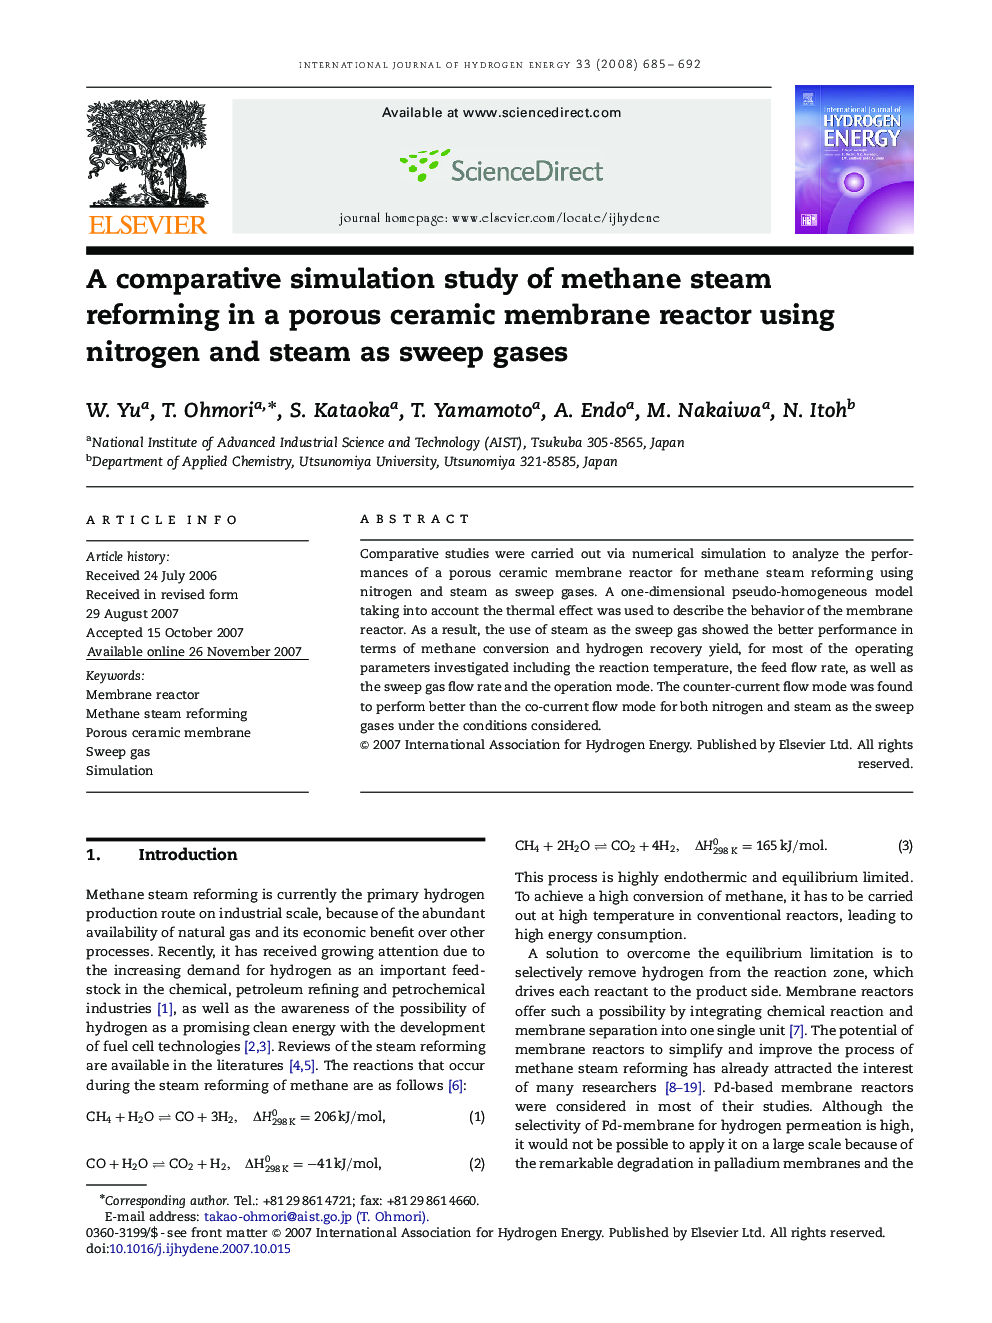 A comparative simulation study of methane steam reforming in a porous ceramic membrane reactor using nitrogen and steam as sweep gases